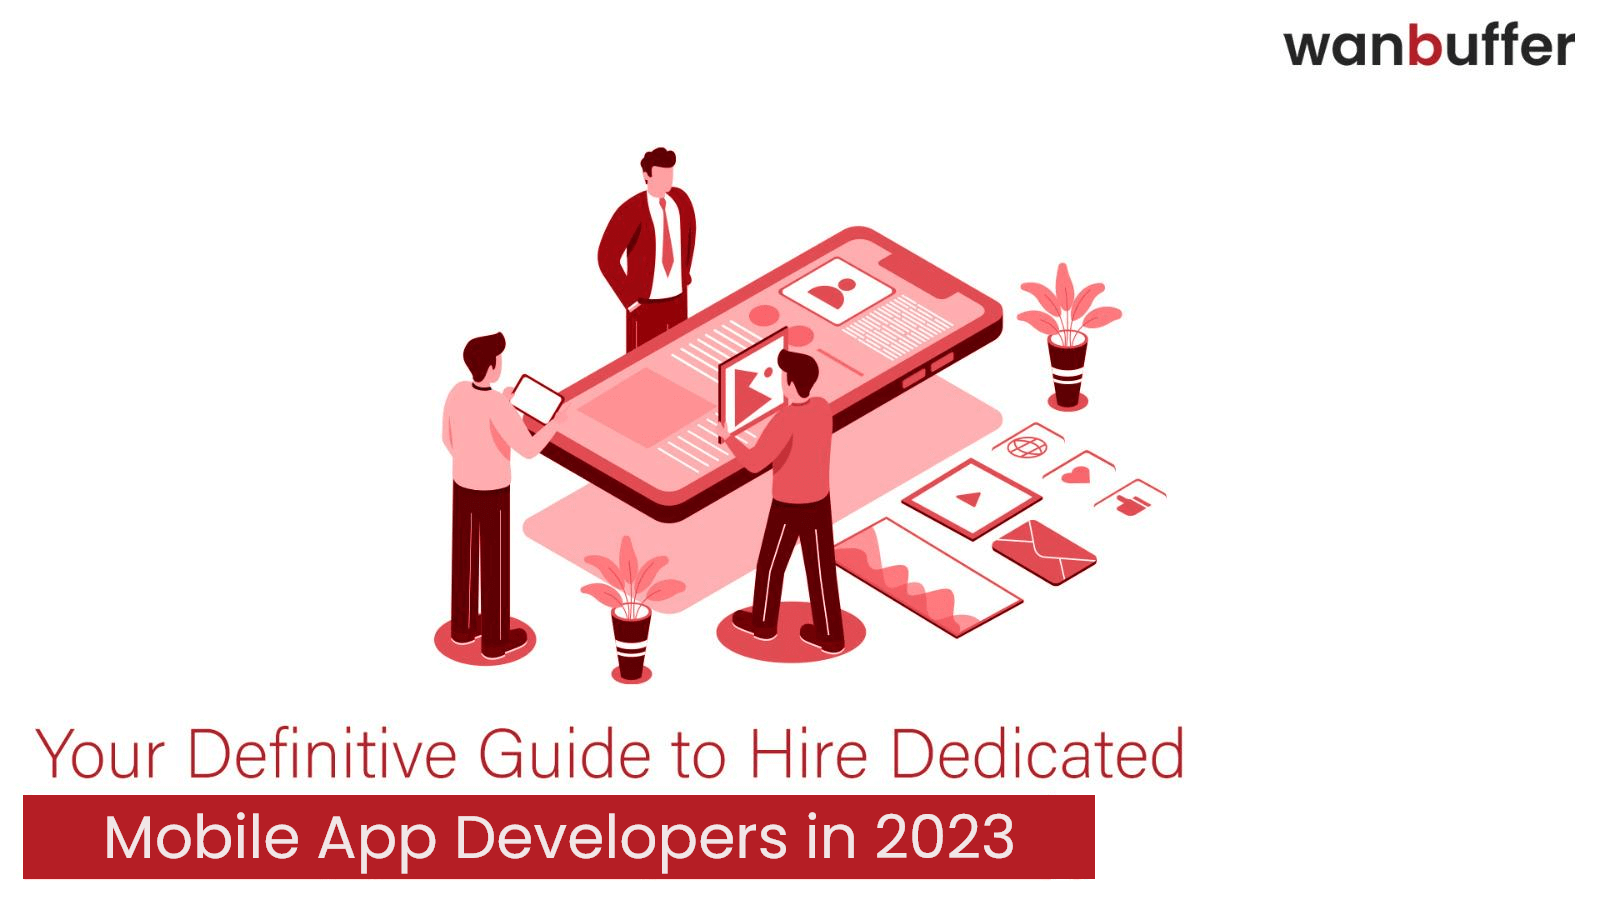 How to Hire Devoted Mobile App Developers in 2023